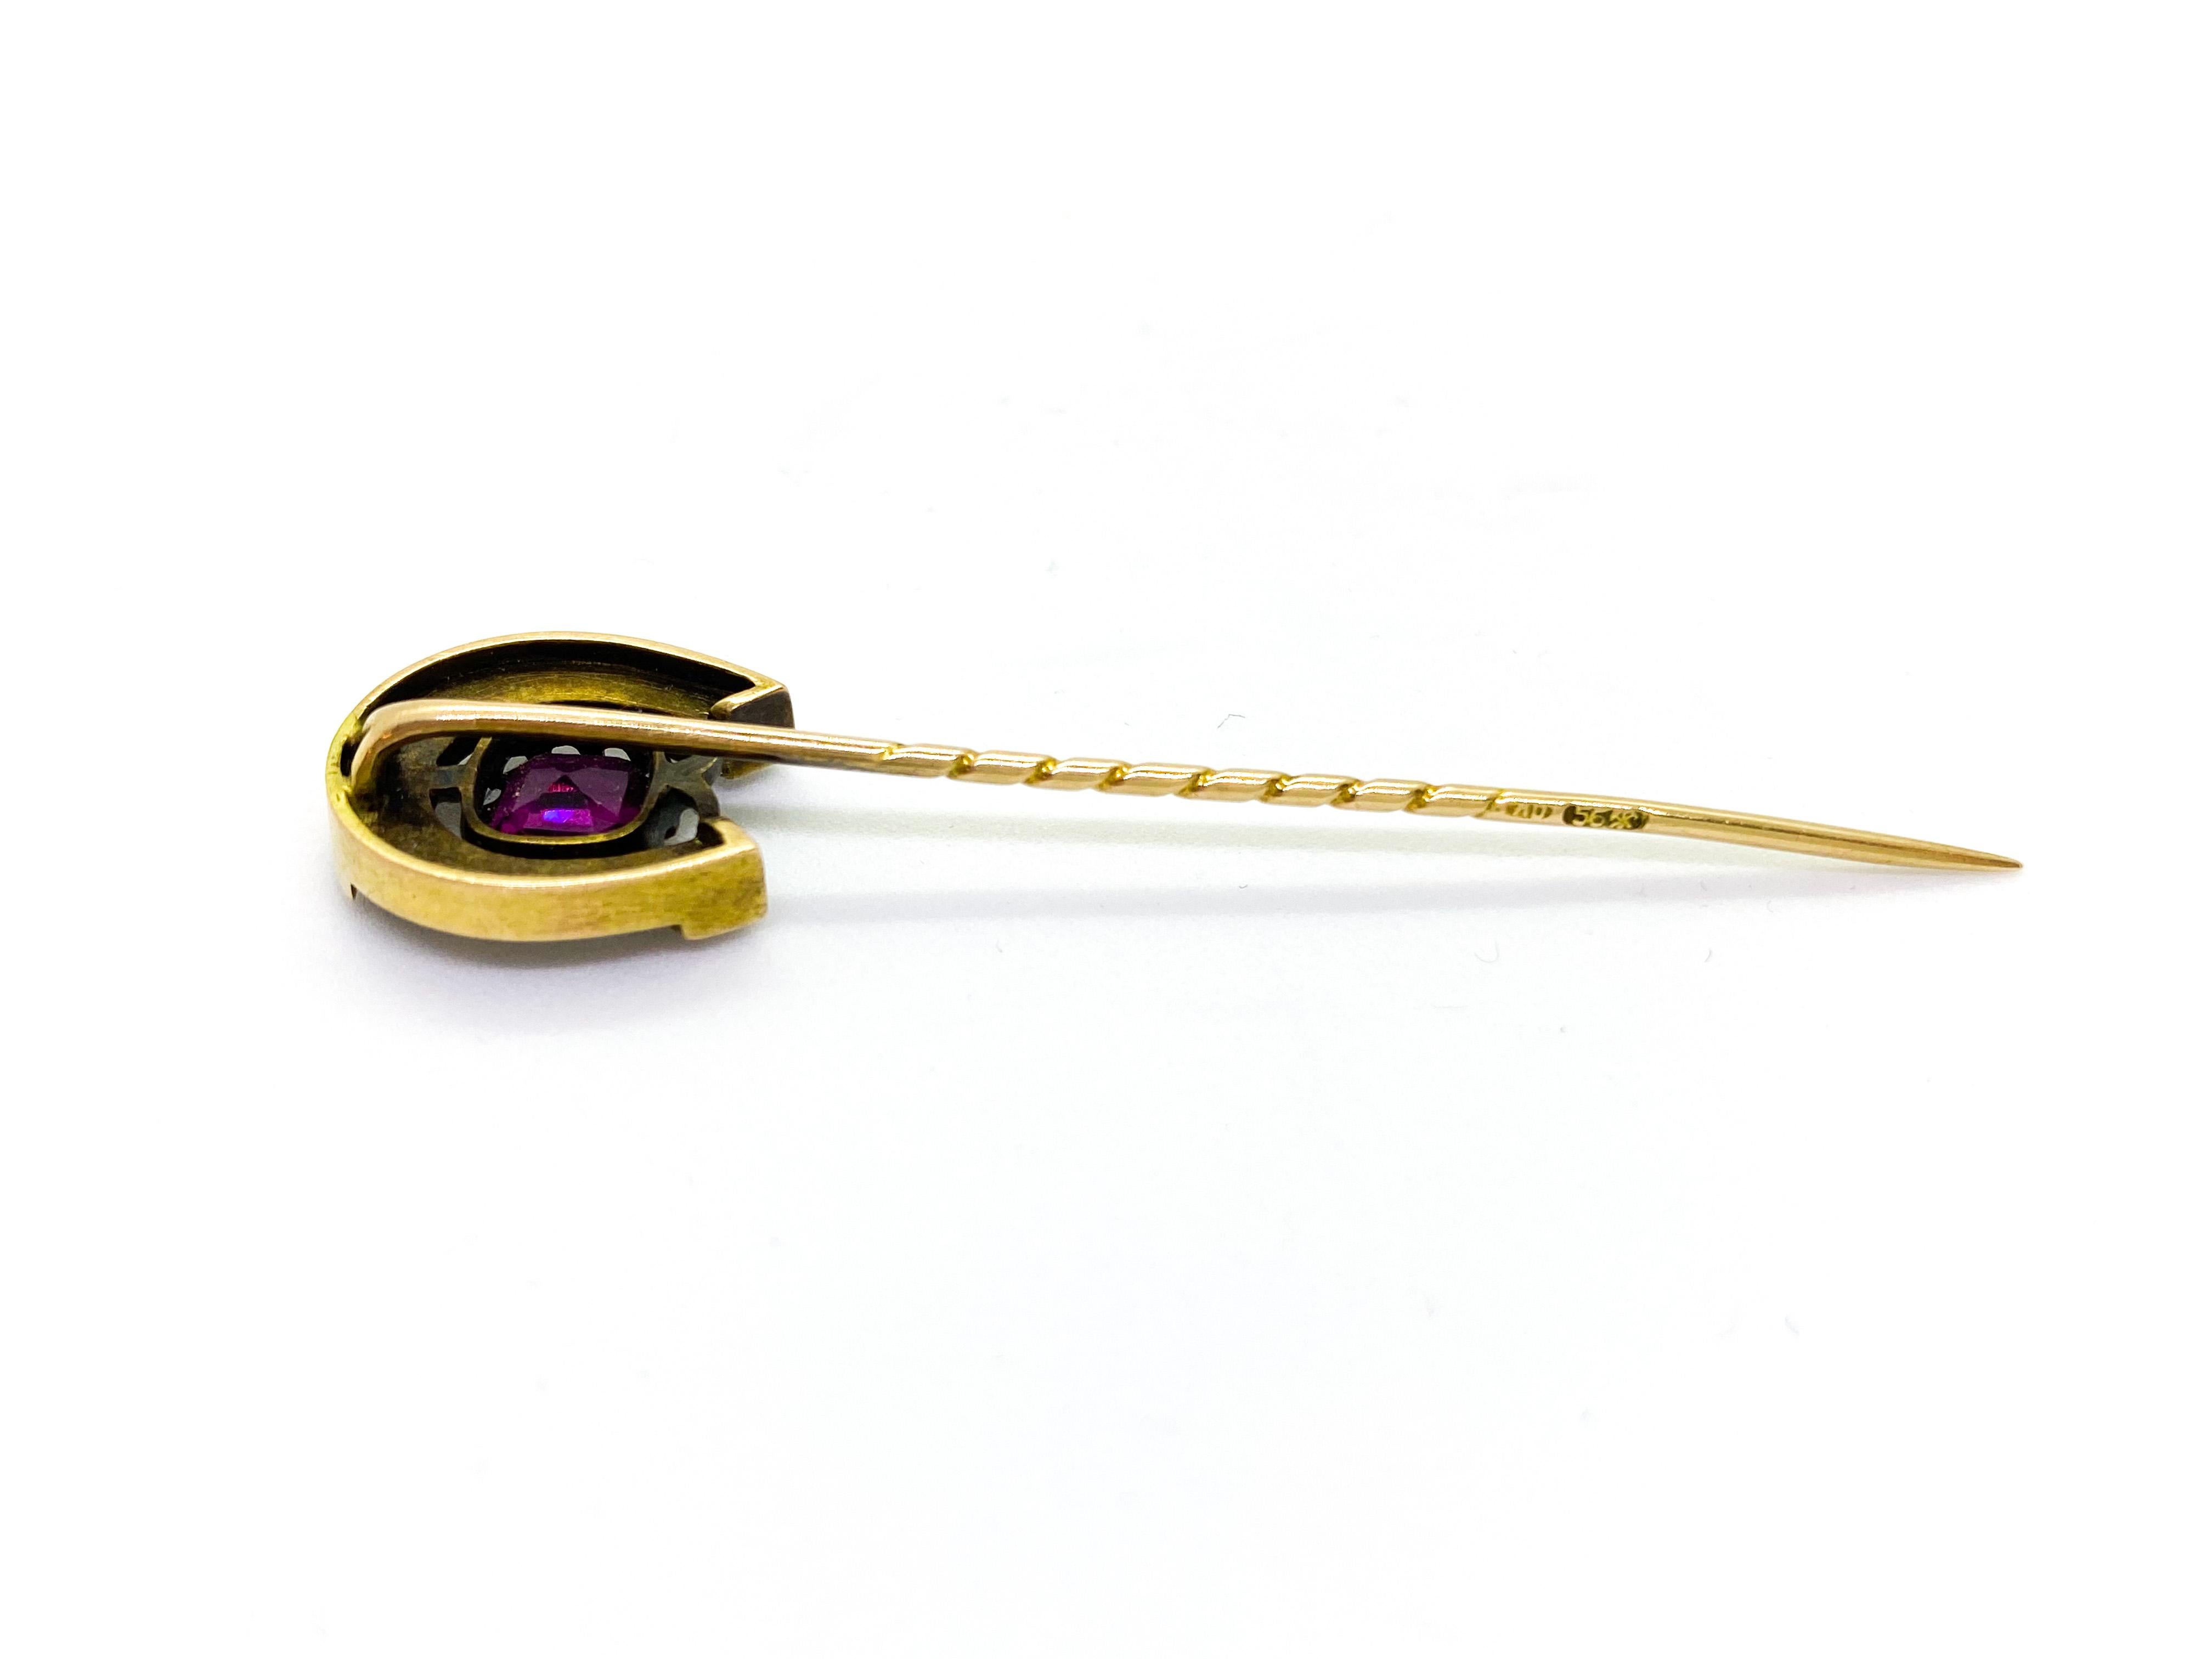 Russian Empire 14 Carat Yellow Gold Pearls Red Garnet Horse Shoe Stickpin Russia For Sale